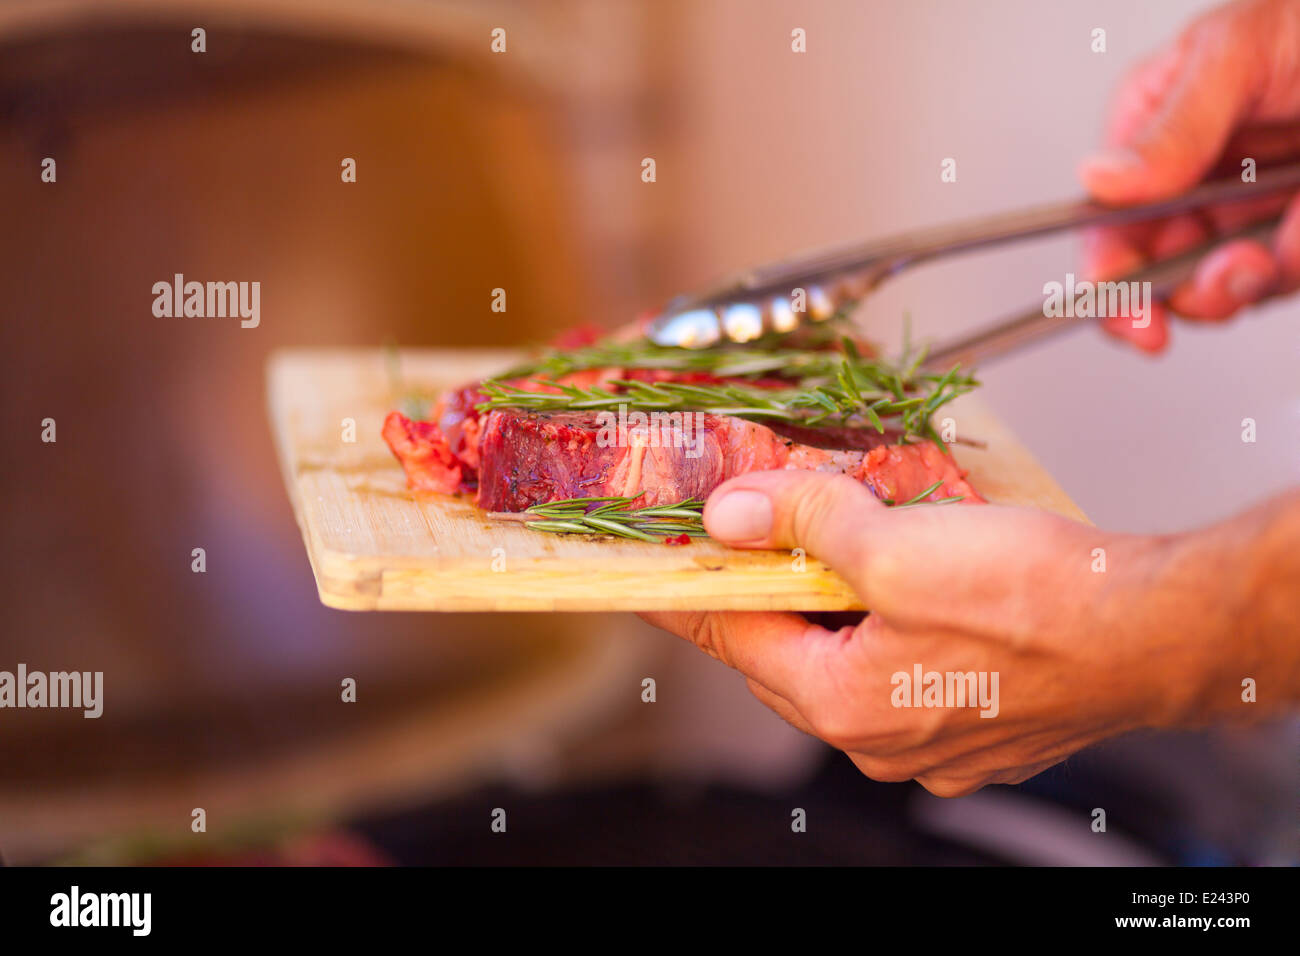 Man hands with fresh meat preparing on grill close up Stock Photo